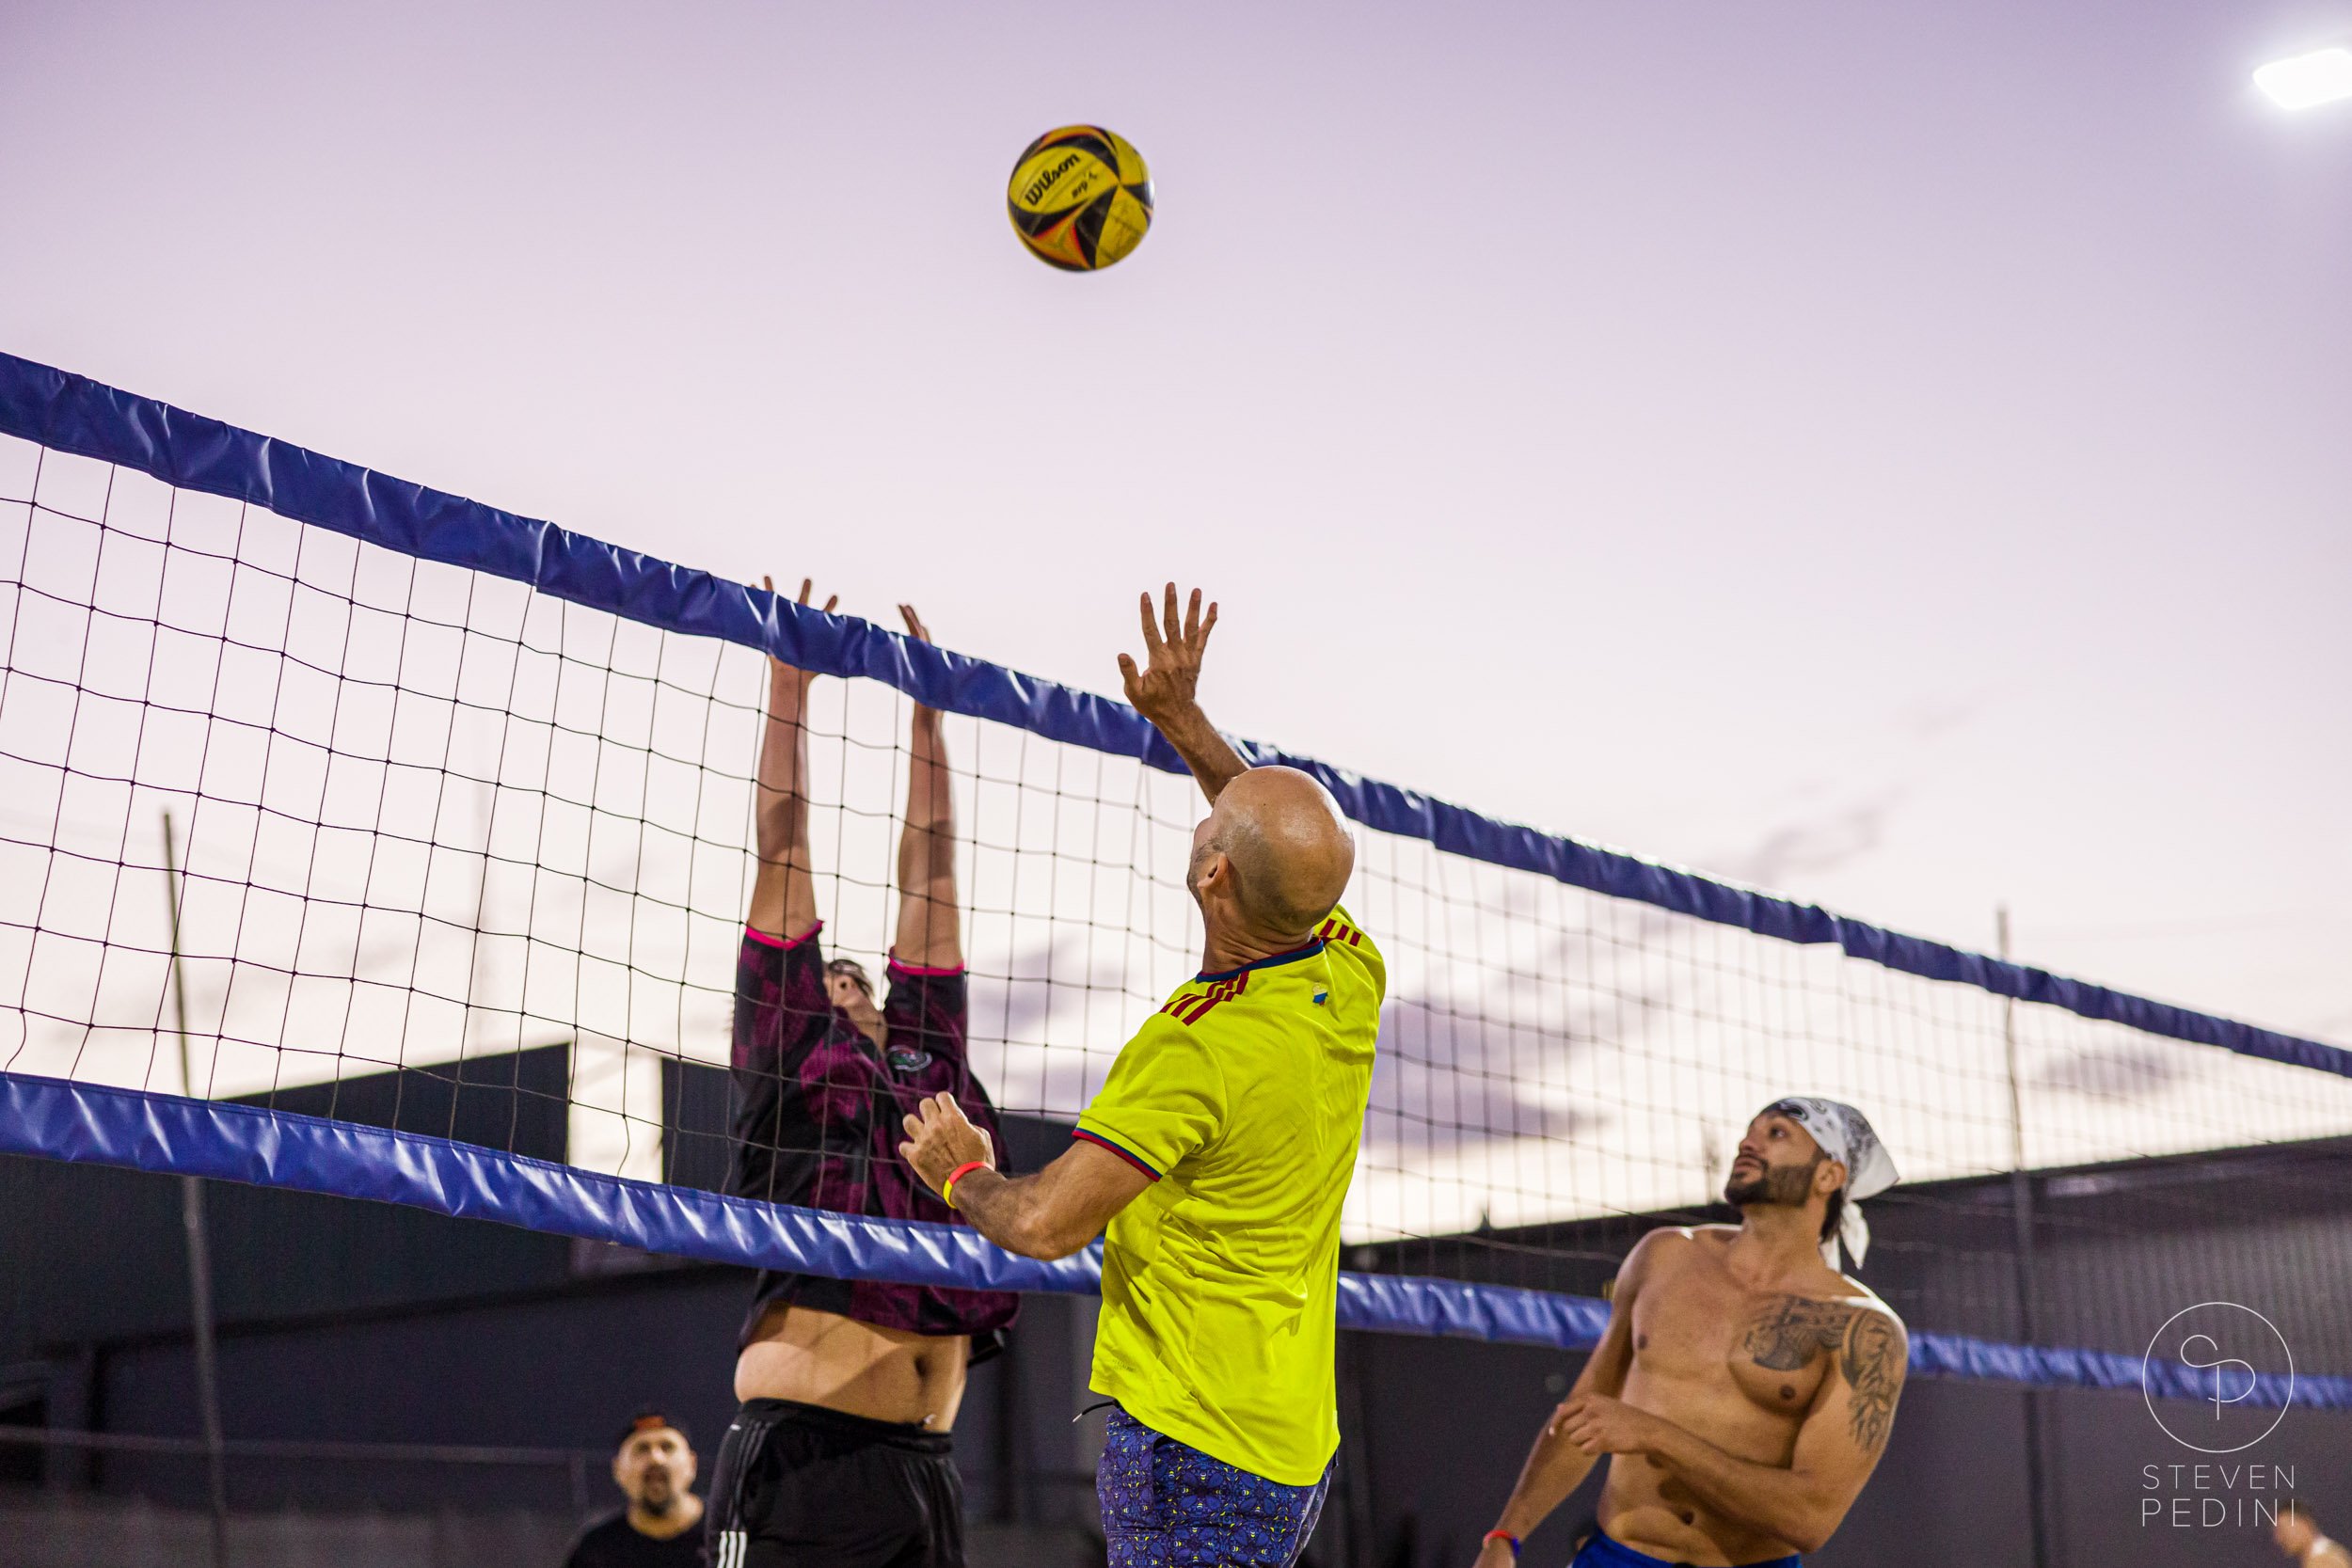 Steven Pedini Photography - Bumpy Pickle - Sand Volleyball - Houston TX - World Cup of Volleyball - 00301.jpg